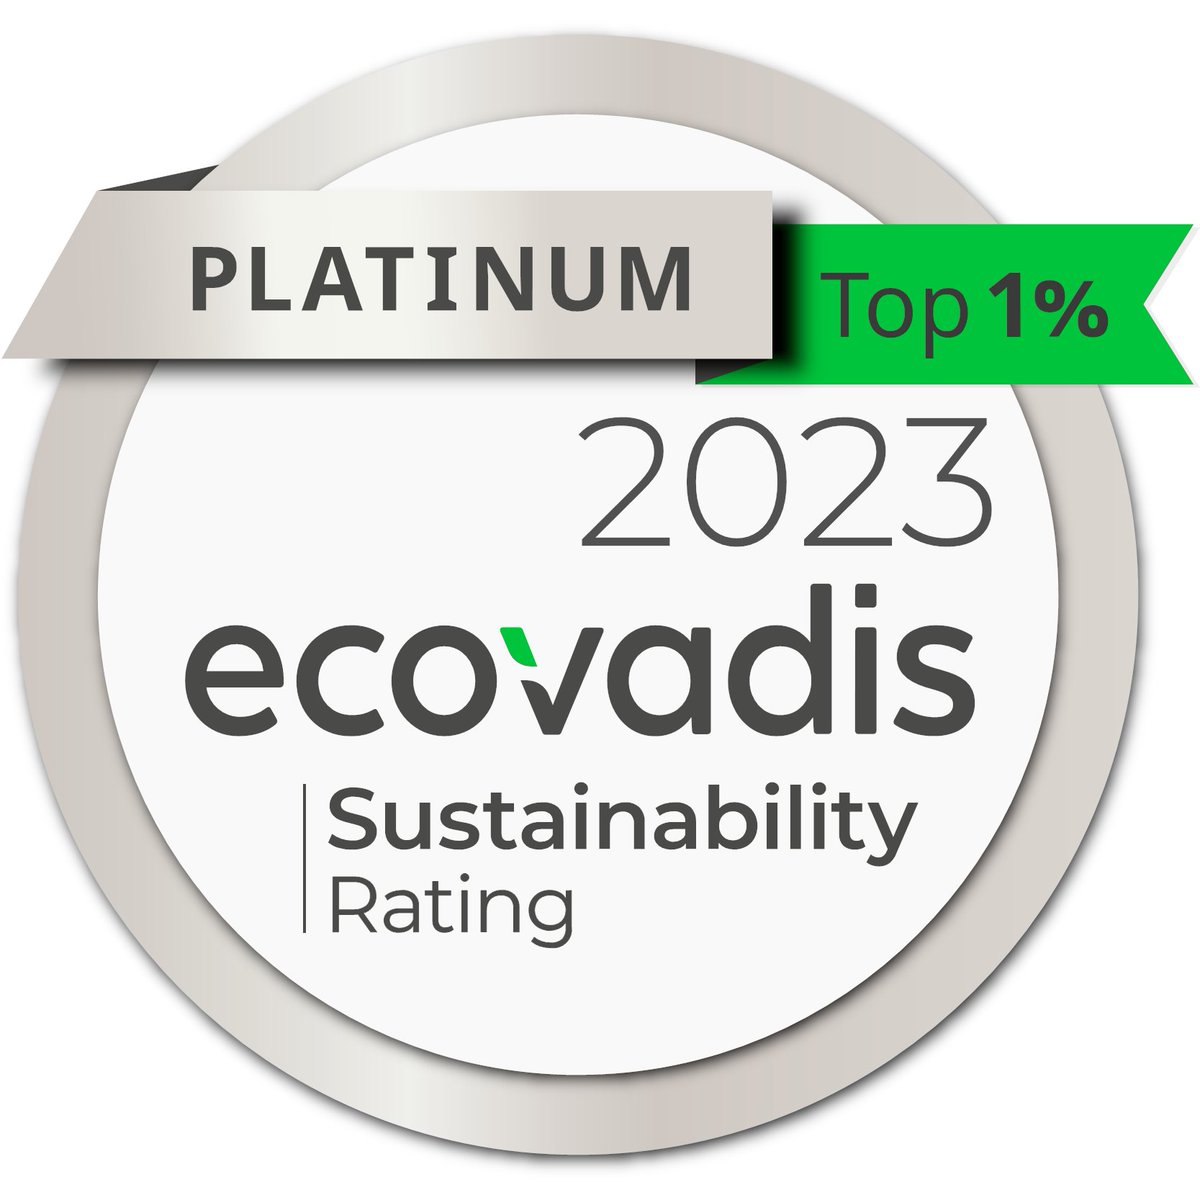 Groupe SEB becomes Platinium🏆at the @ecovadis 2023 Rating. The highest rating in existence, putting it in the Top 1% 🏅 of companies assessed. The assessment covers all the Group's geographies, brands and businesses, including its professional business. #GroupeSEB #EcoVadis